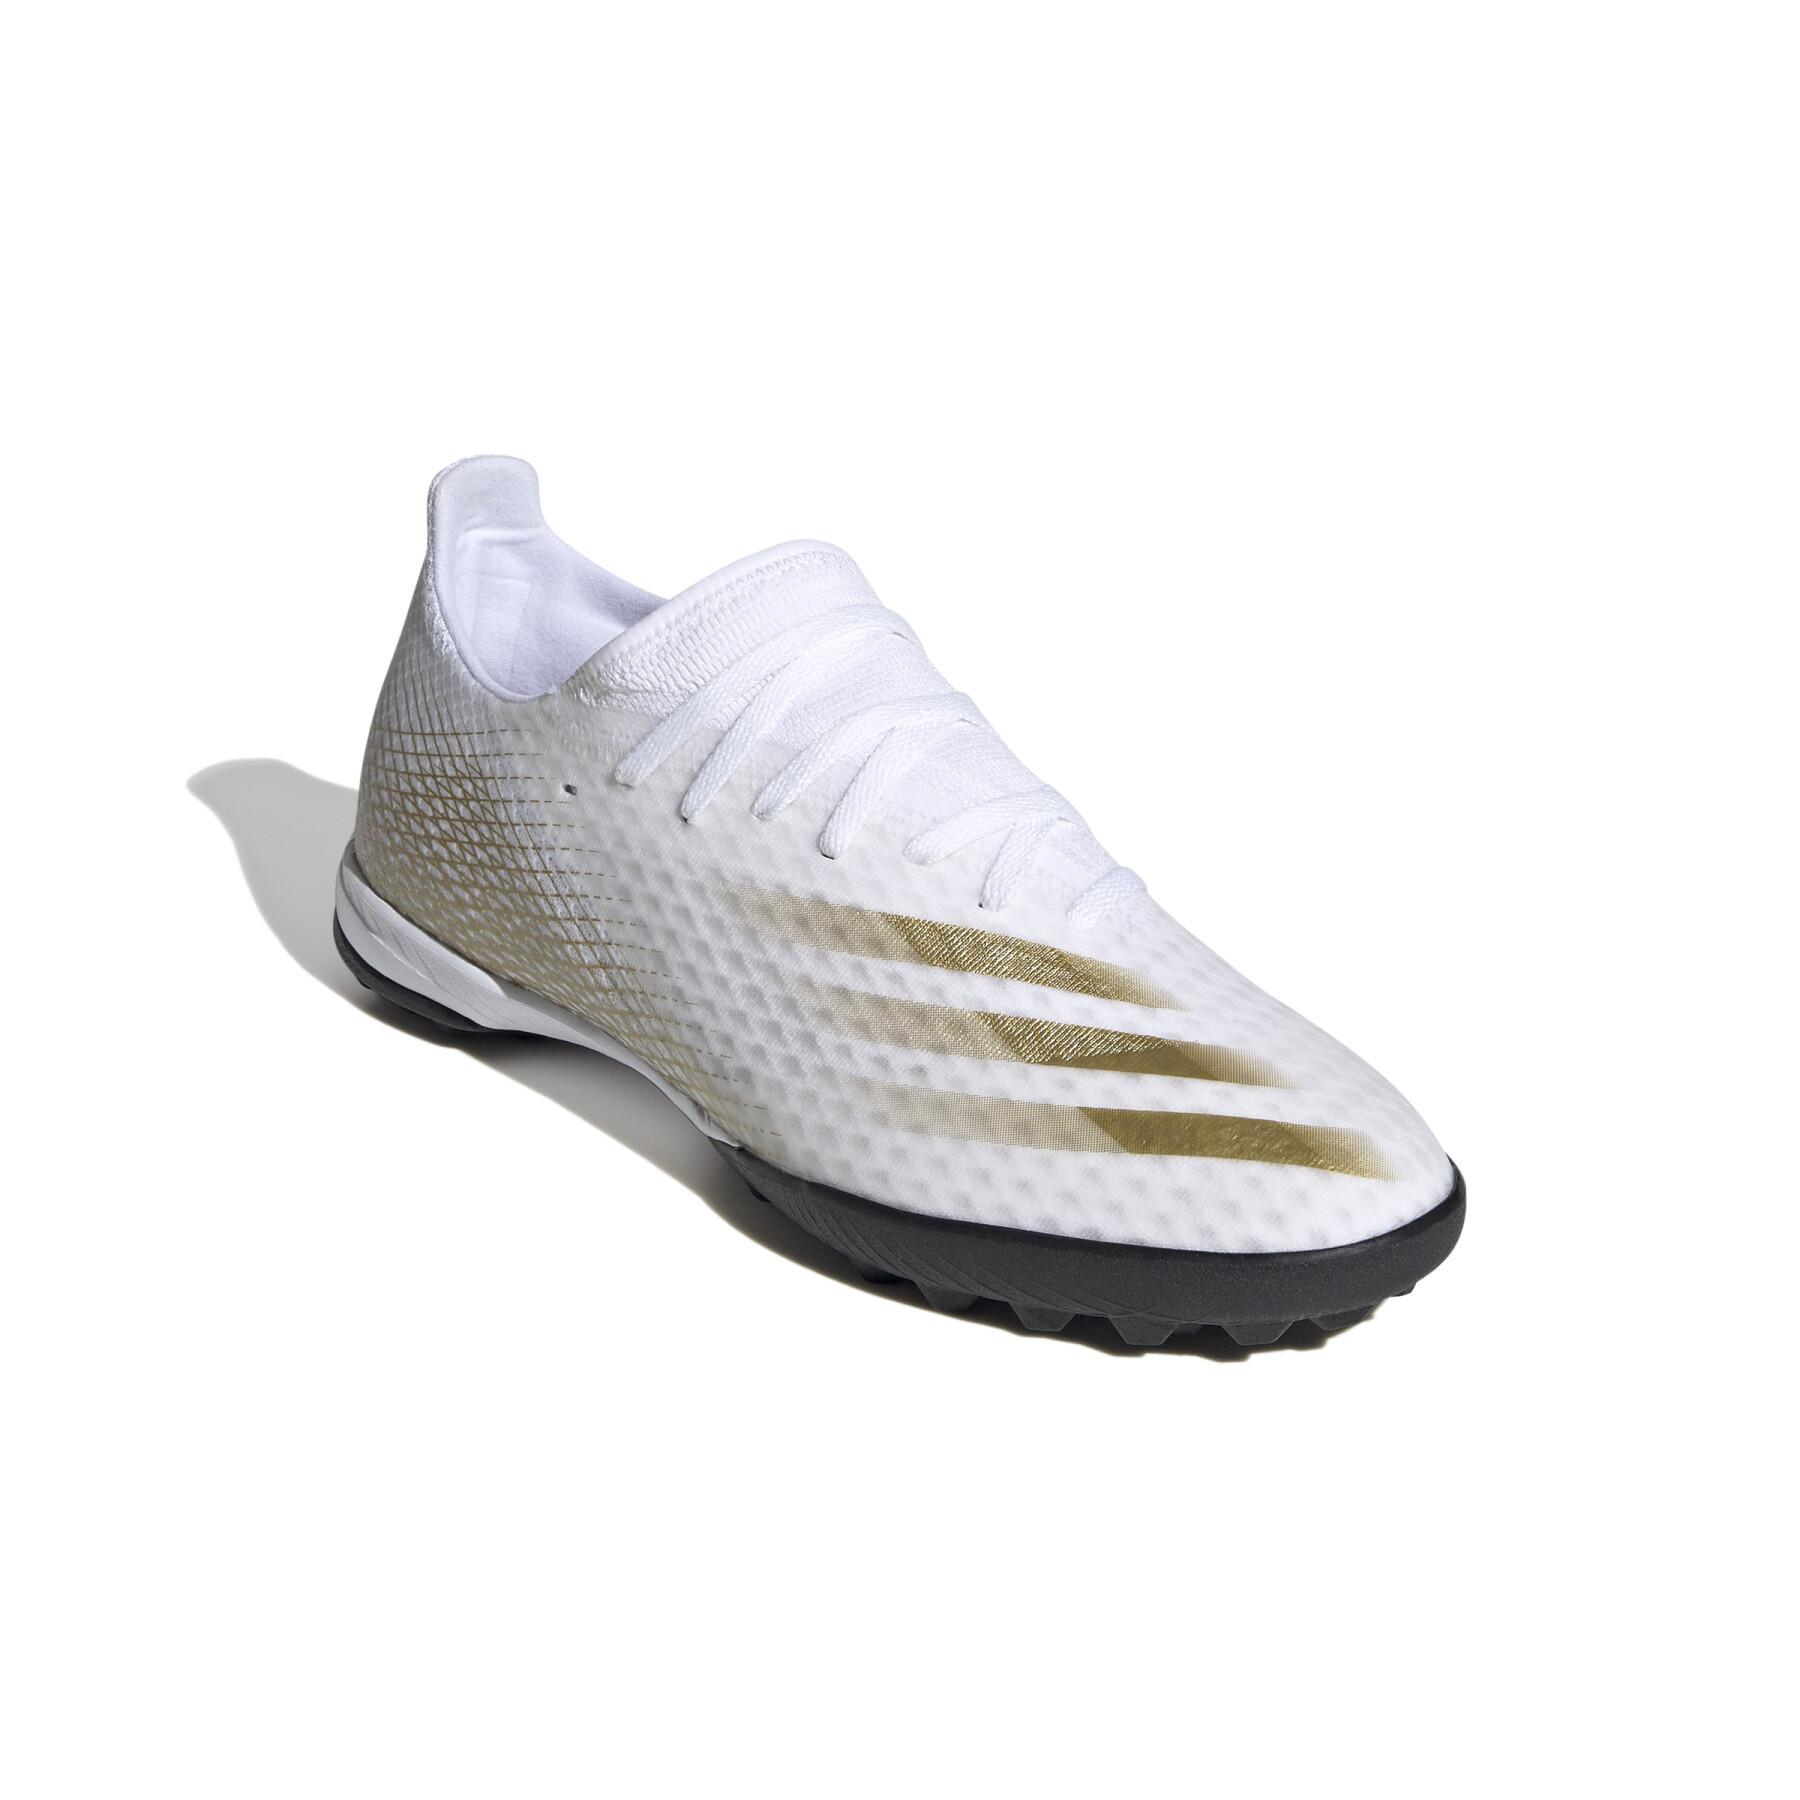 Voetbalschoenen adidas X Ghosted.3 TF